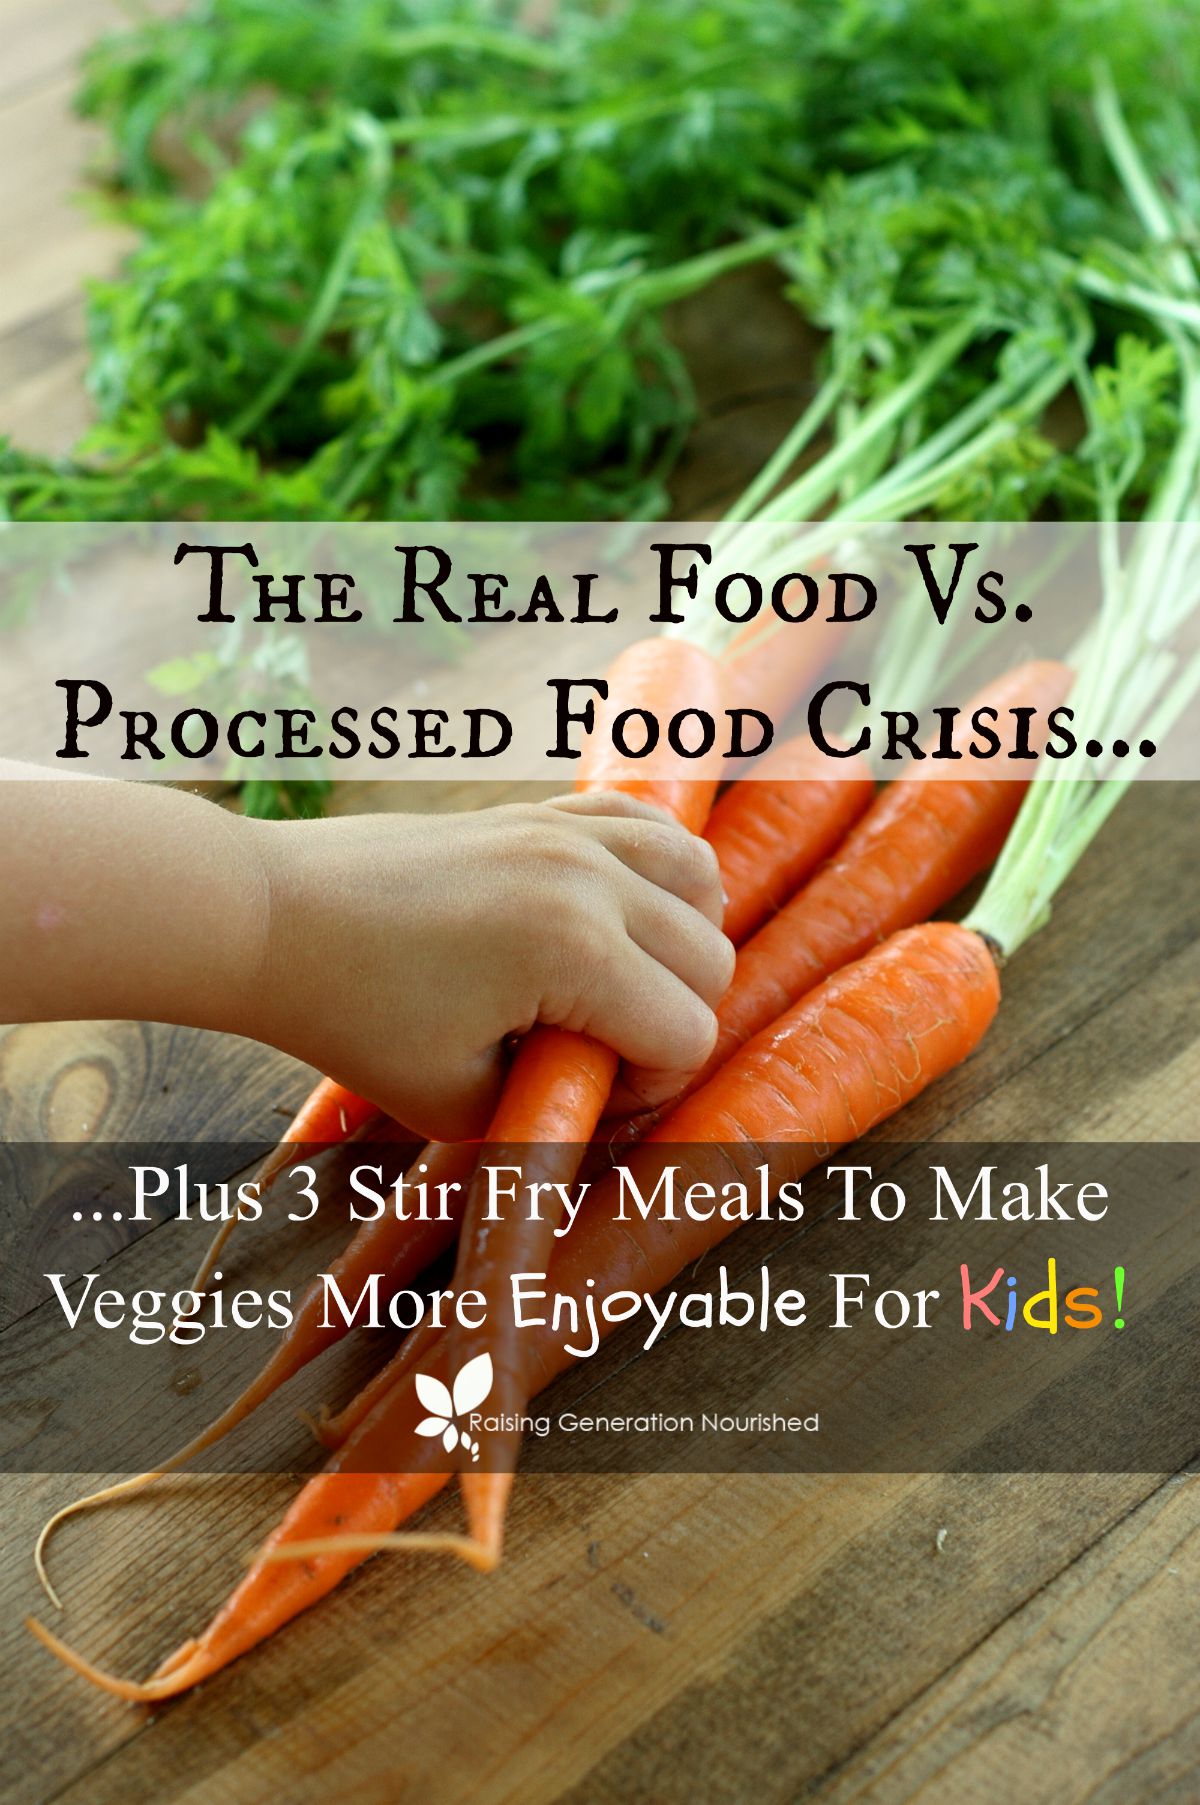 The Real Food Vs. Processed Food Crisis...And 3 Stir Fry Meals That Will Have Your Kids Gladly Eating Their Veggies!